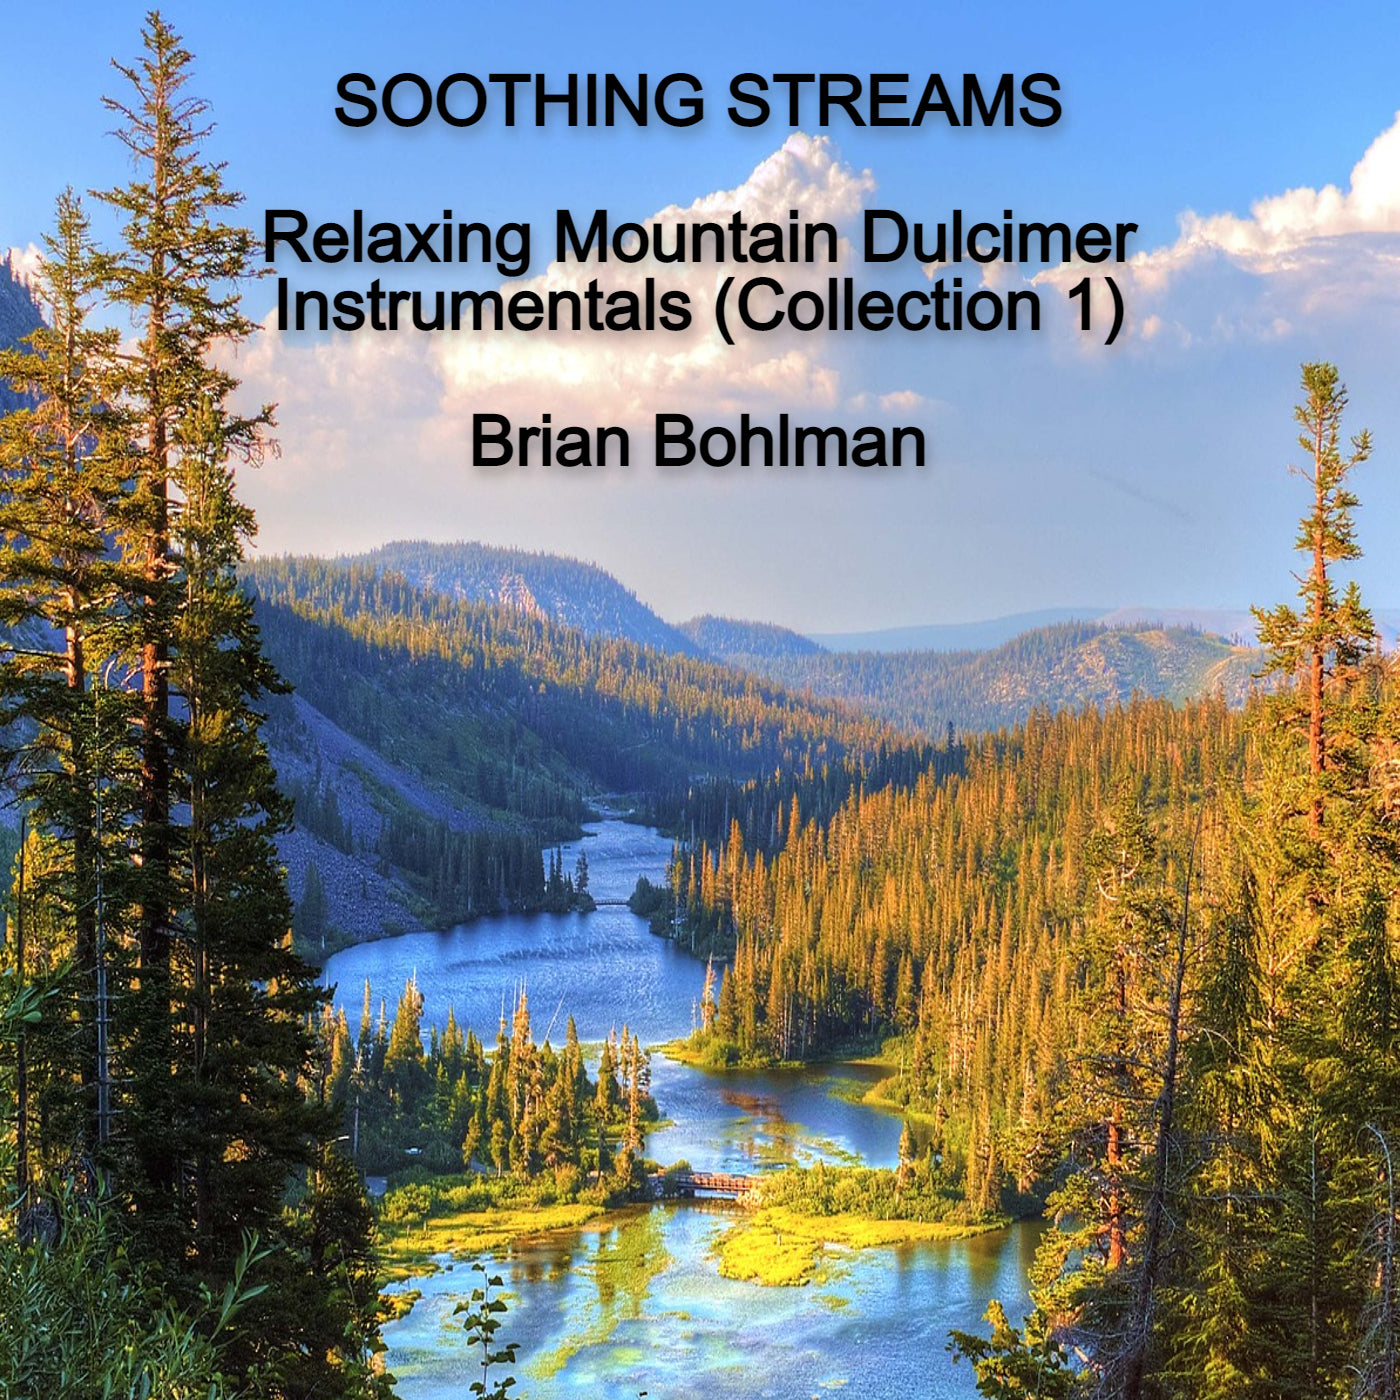 SOOTHING STREAMS: Relaxing Mountain Dulcimer Instrumentals (Collection 1) Music CD by Brian Bohlman